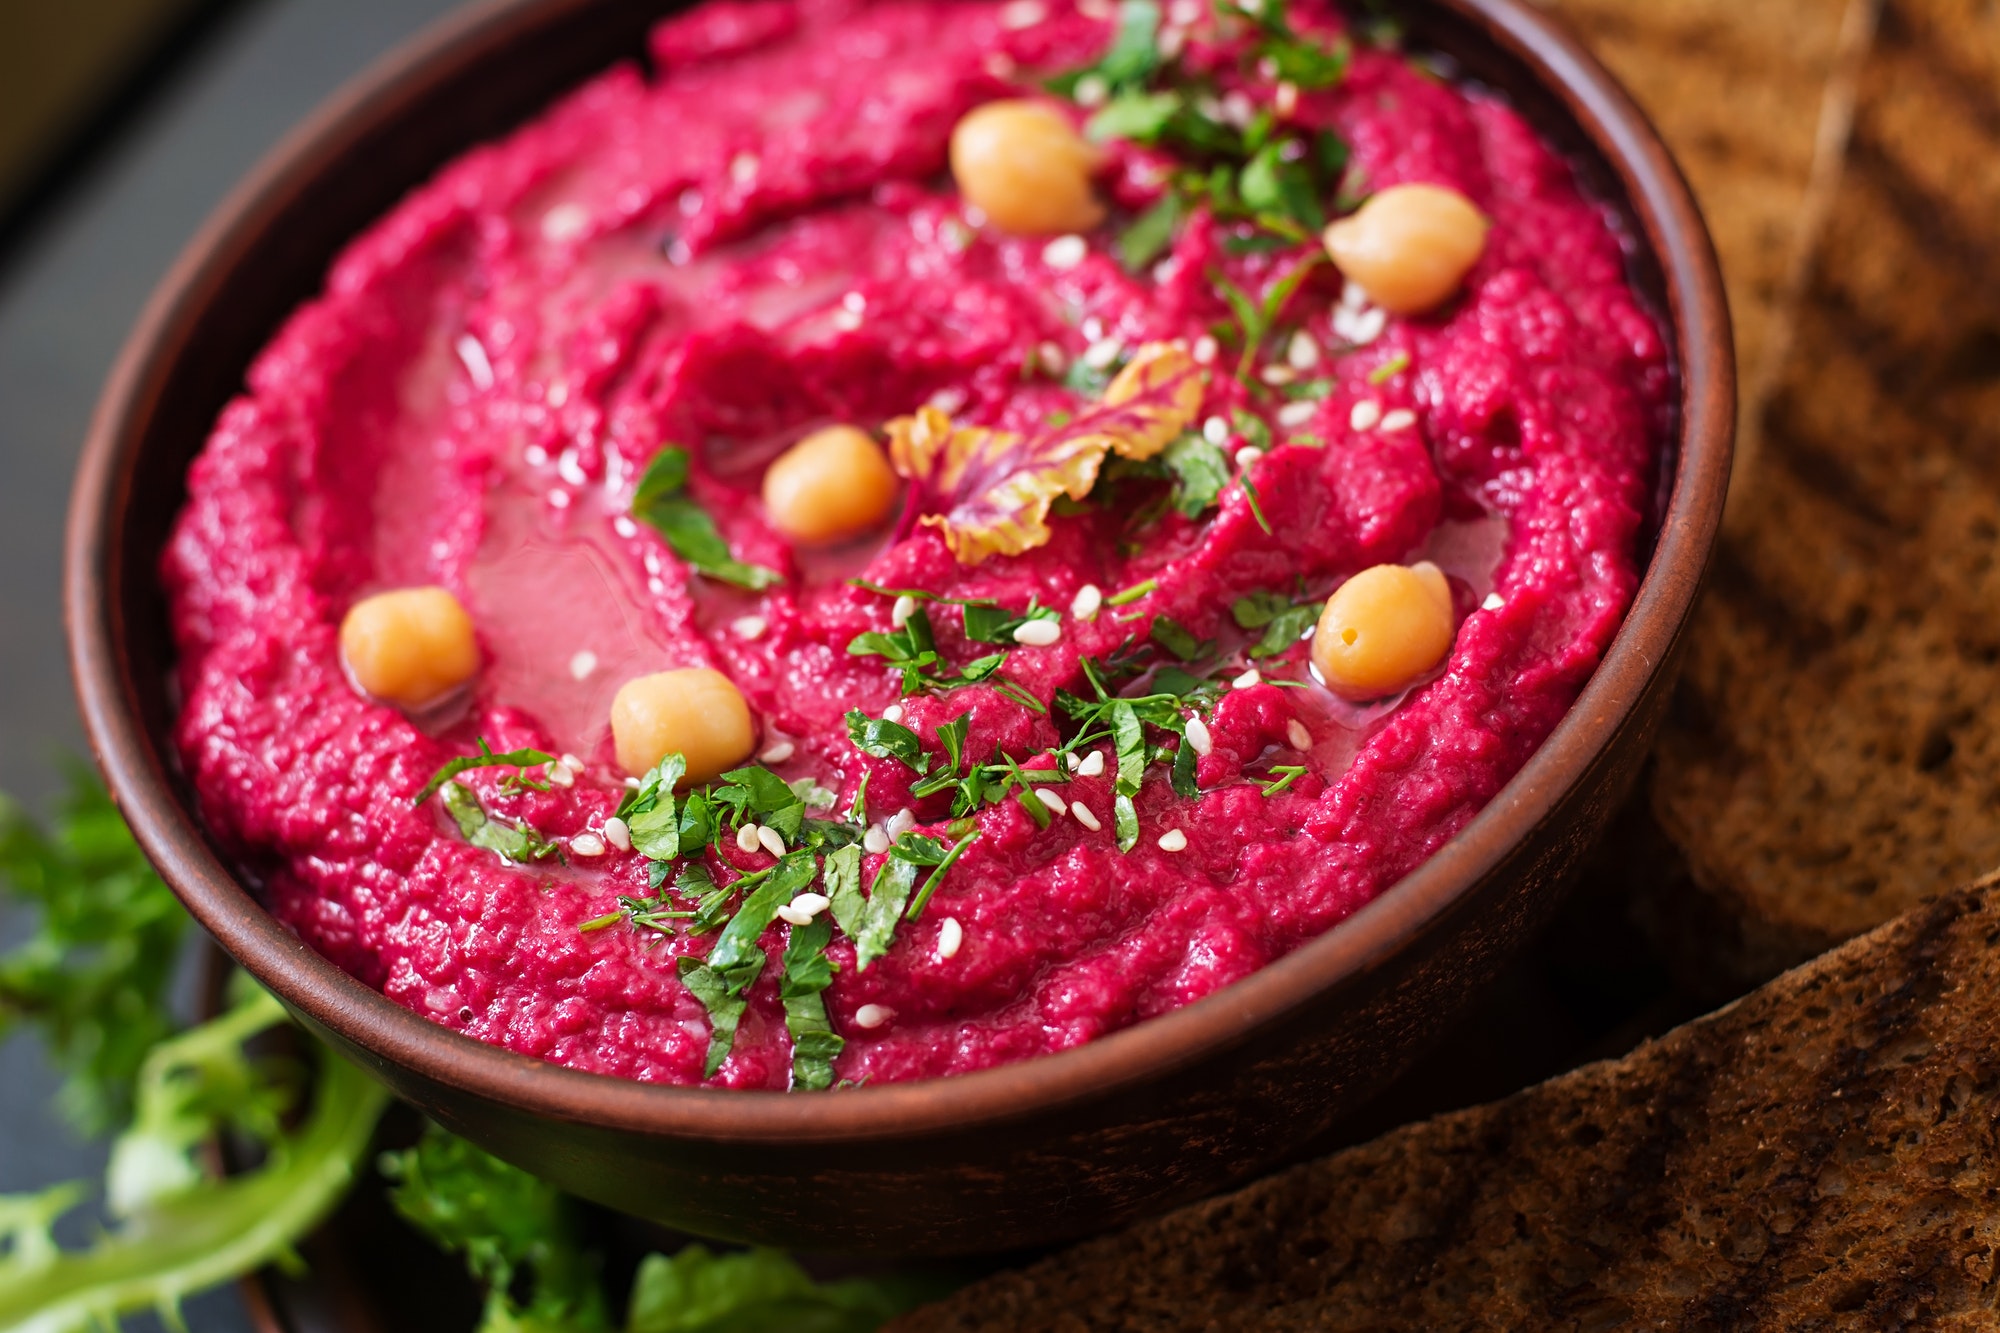 Roasted Beet Hummus with toast in a ceramic bowl on a dark background